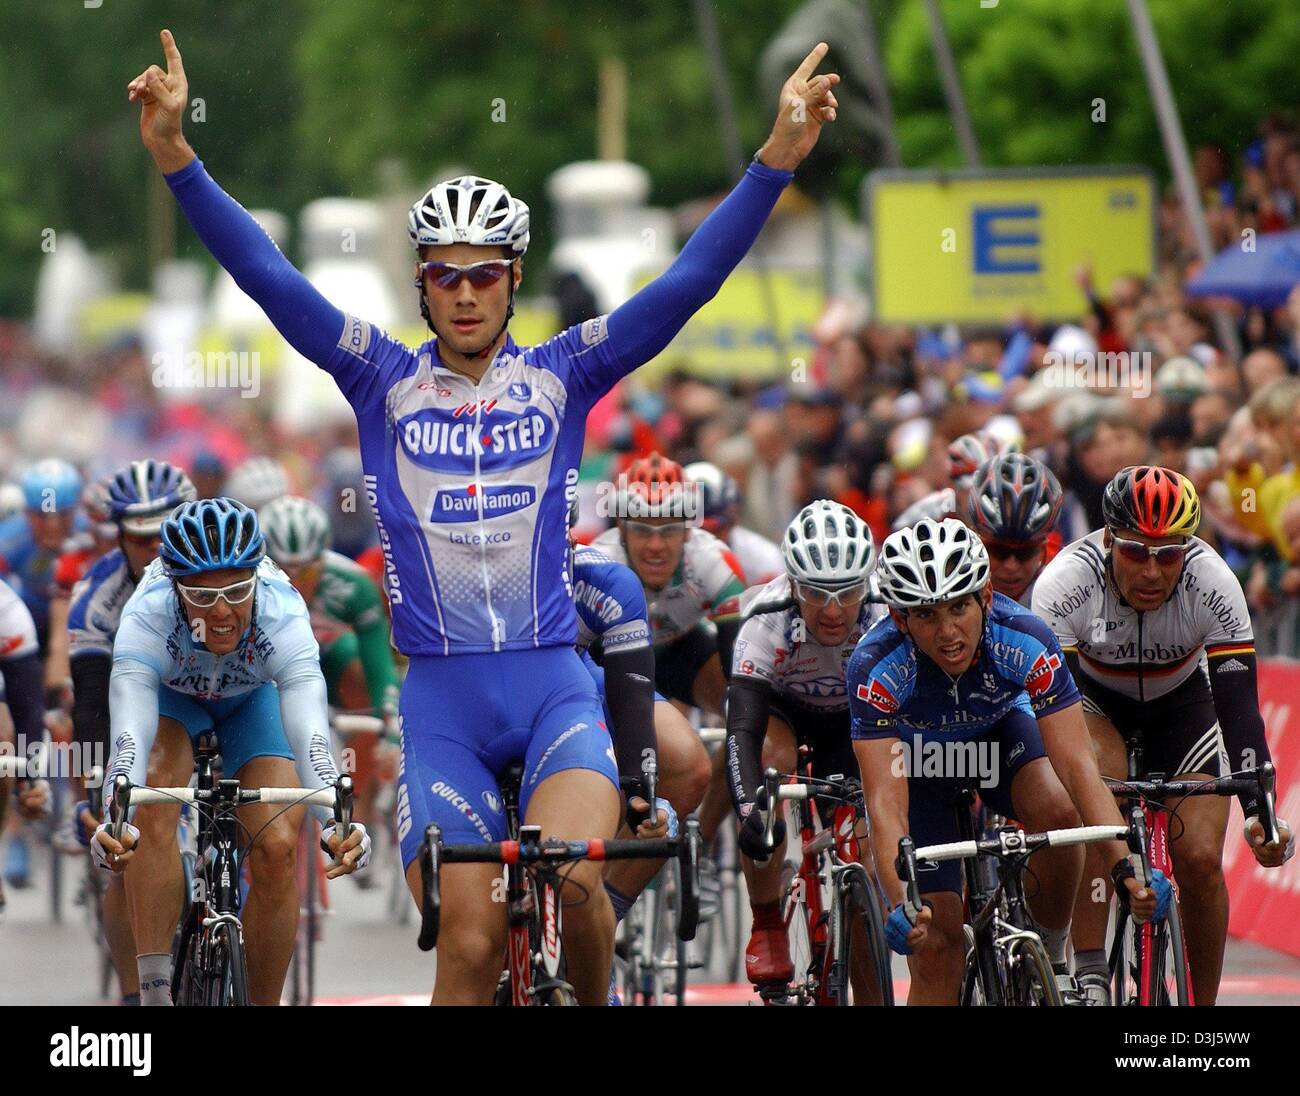 (dpa) - Belgian cyclist Tom Boonen (team Quickstep Davitamon) celebrates after winning the second stage of the Tour of Germany cycling race in Wangen im Allgaeu, Germany, Tuesday, 1 June 2004. The seven stage long tour totals 1,095.7 km and leads from Karlsruhe to Leipzig. Stock Photo